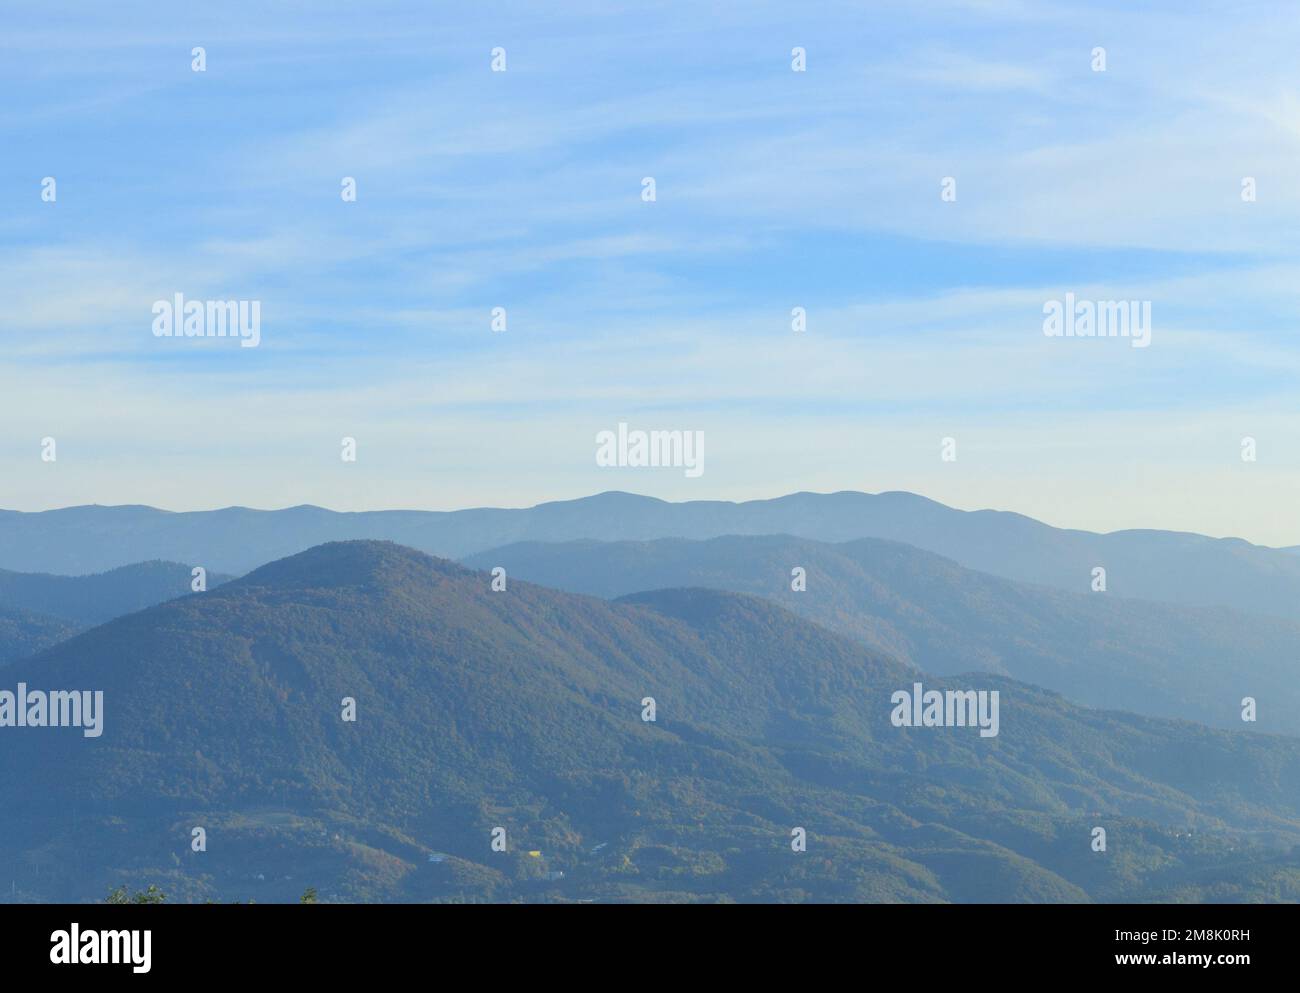 The hills with green lush trees against a blue sky in Sarajevo Stock Photo